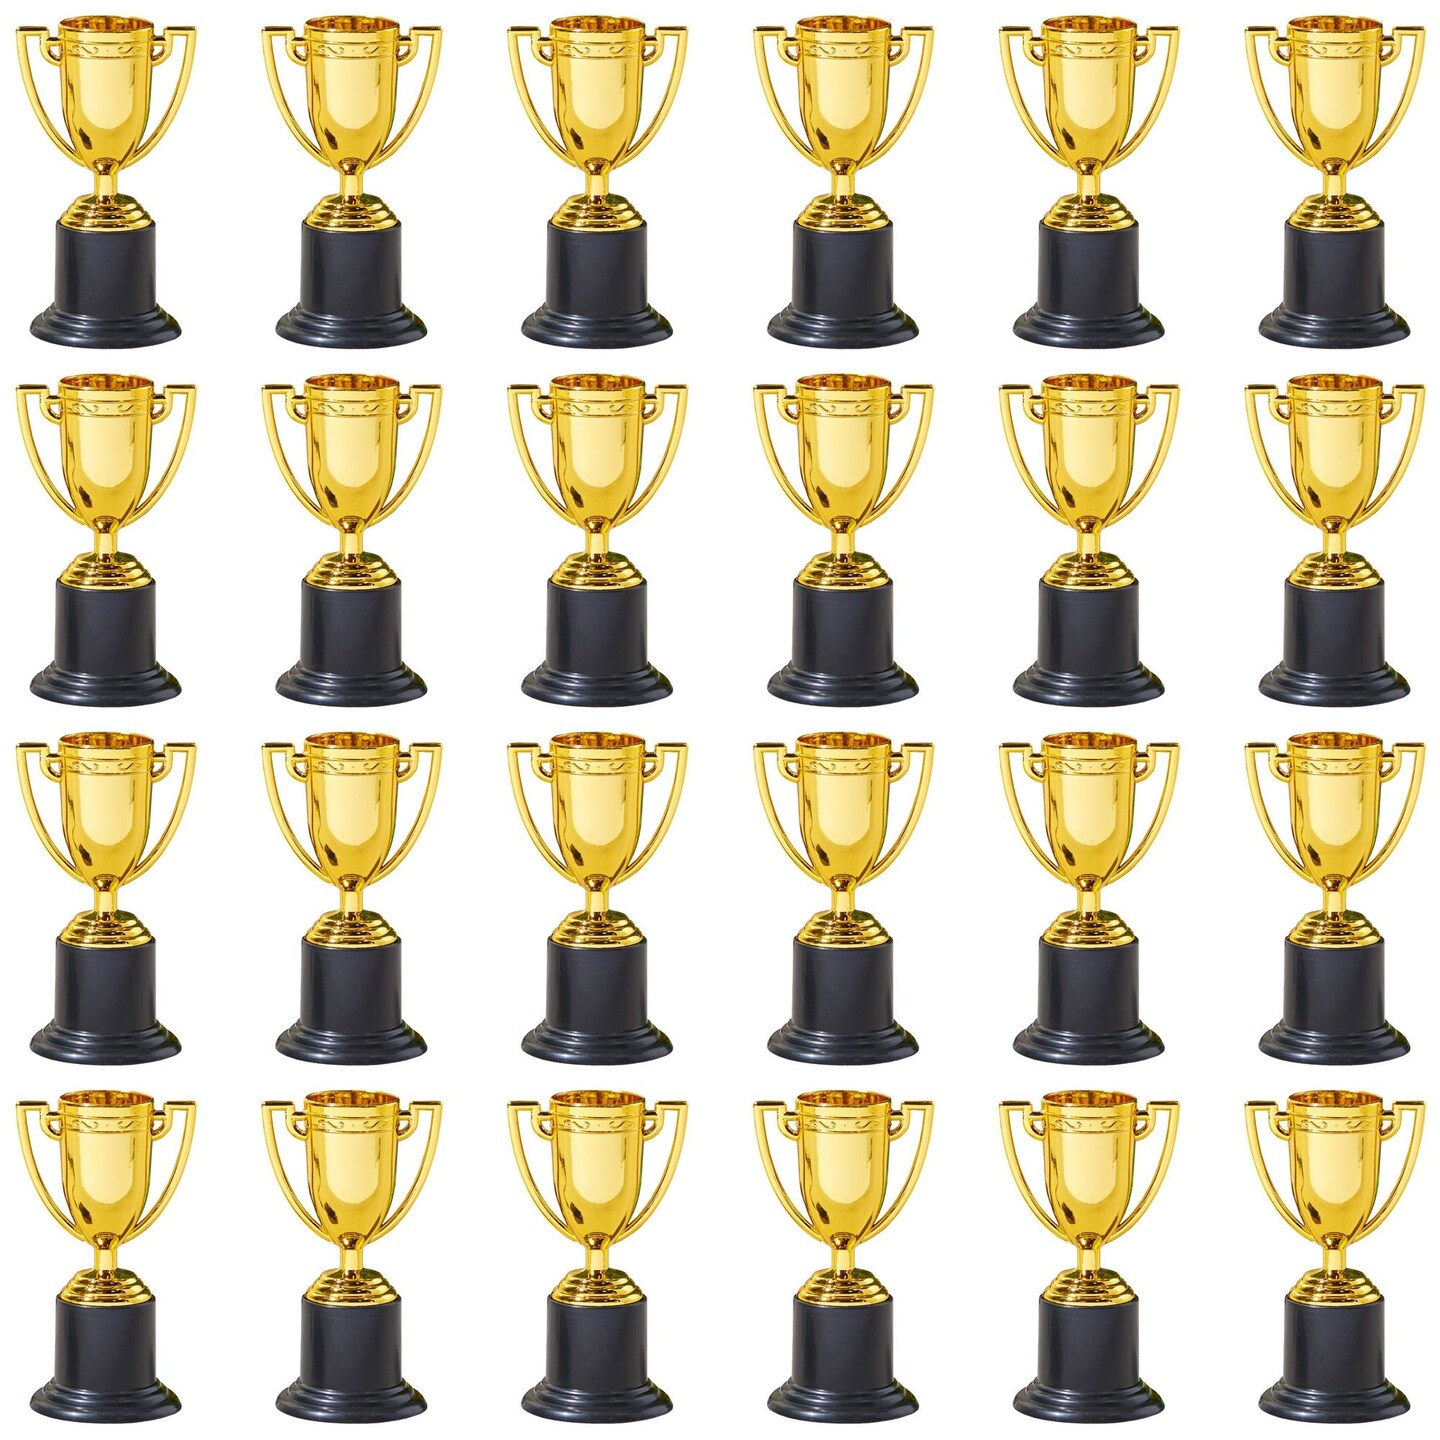 24 Pack Mini Trophies for All Ages Awards, Gold Participation Trophy Cup for Sports, Tournaments, Competitions (4 In)